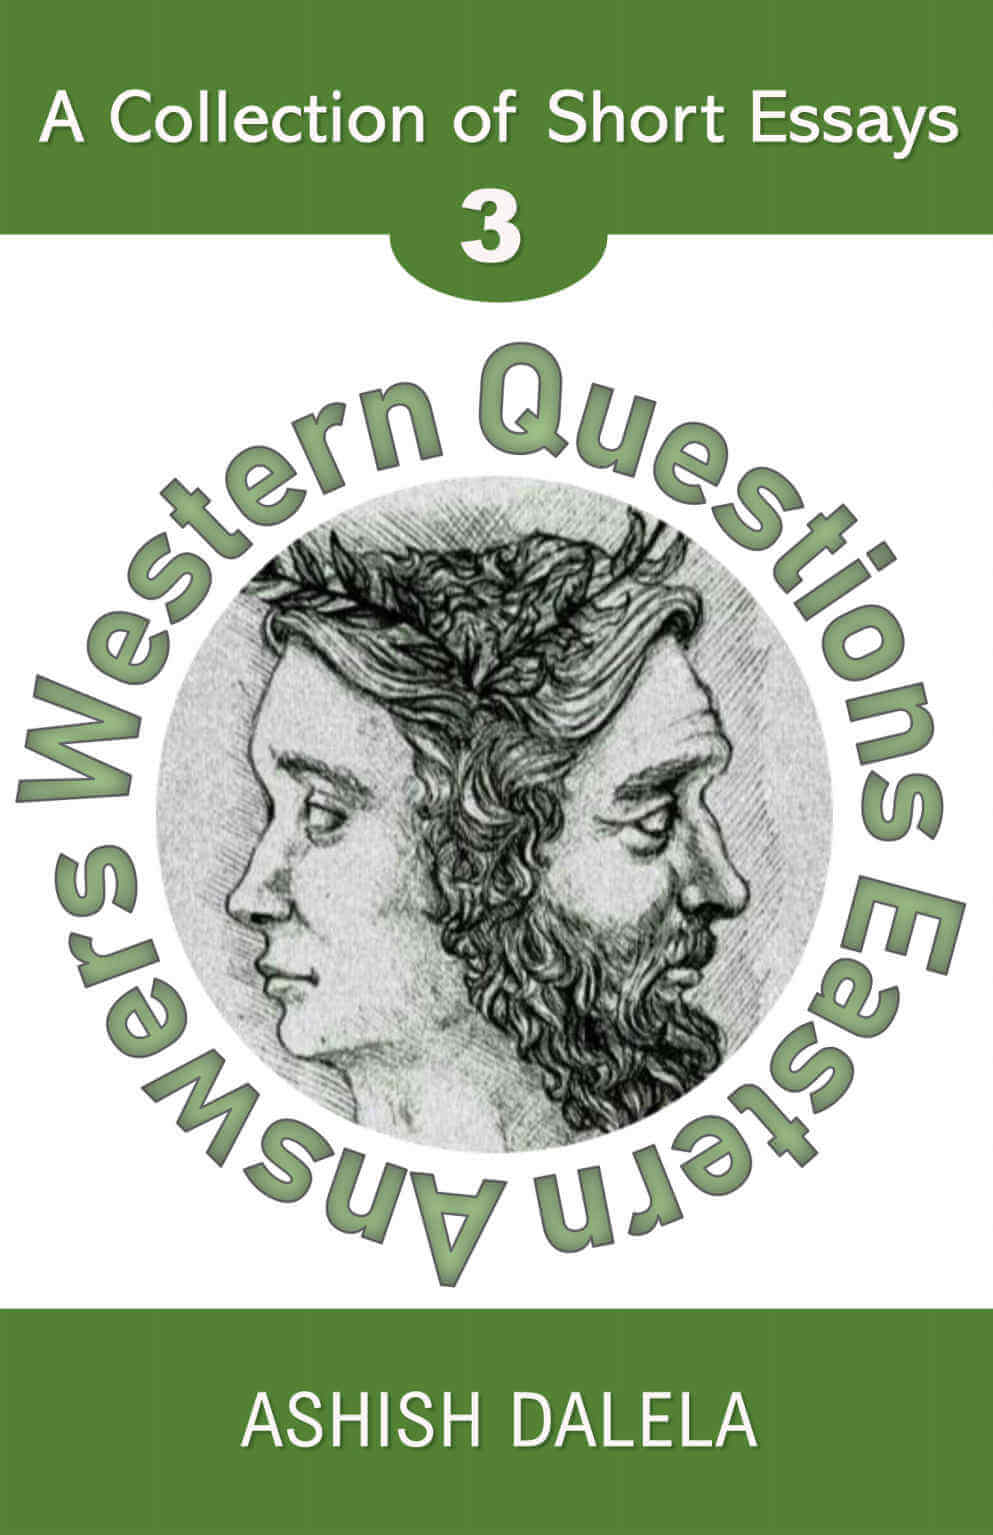 Western Questions Eastern Answers: A Collection of Short Essays - Volume 3